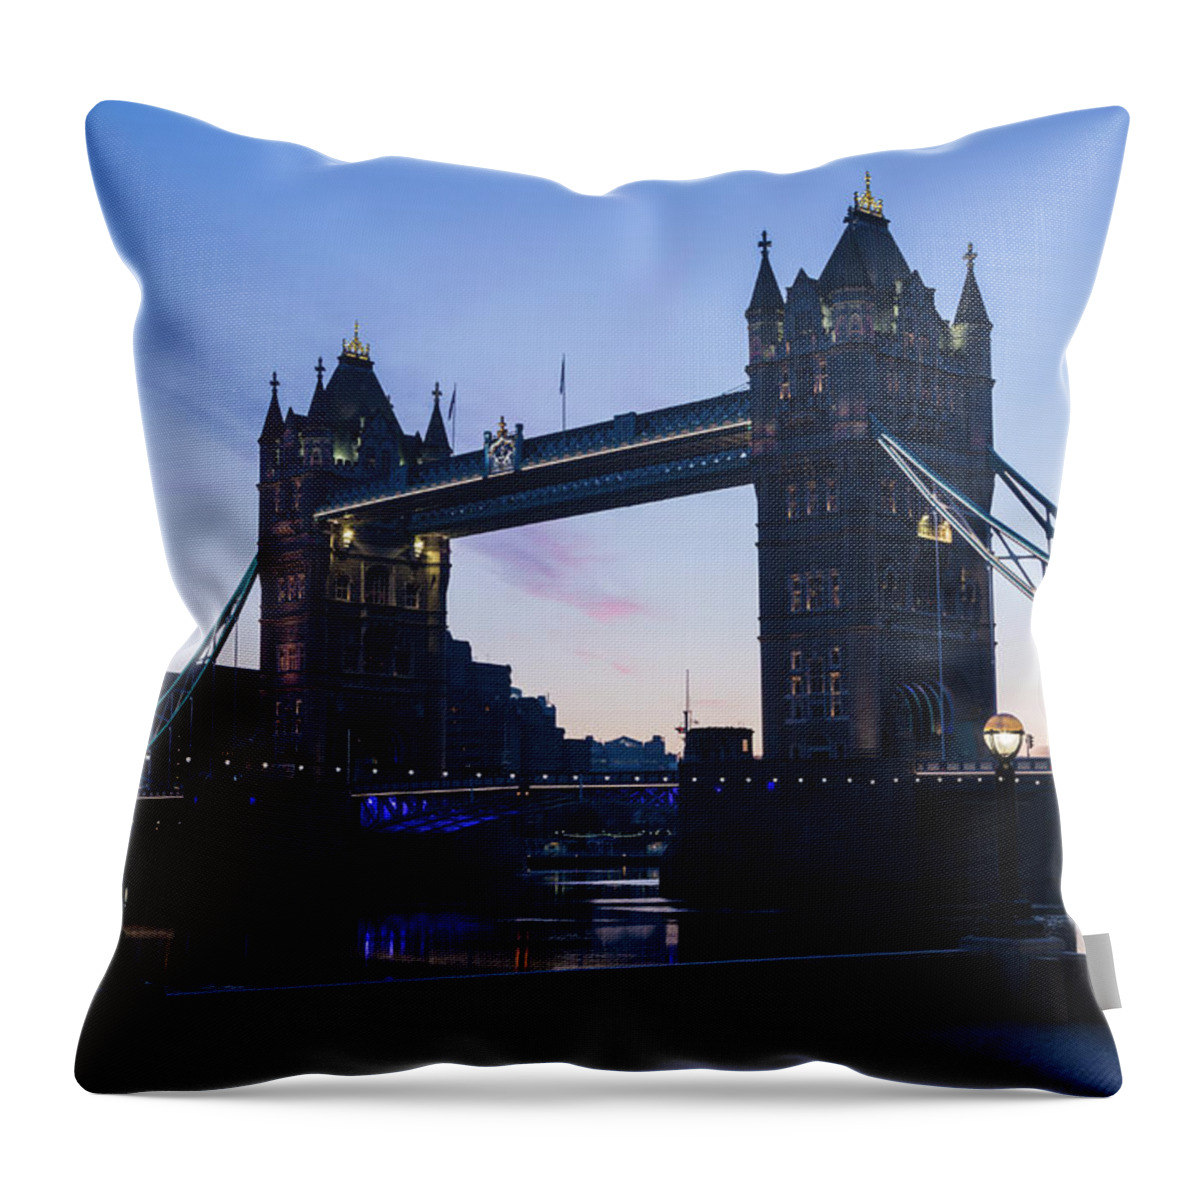 English Culture Throw Pillow featuring the photograph Tower Of London At Dawn by P A Thompson